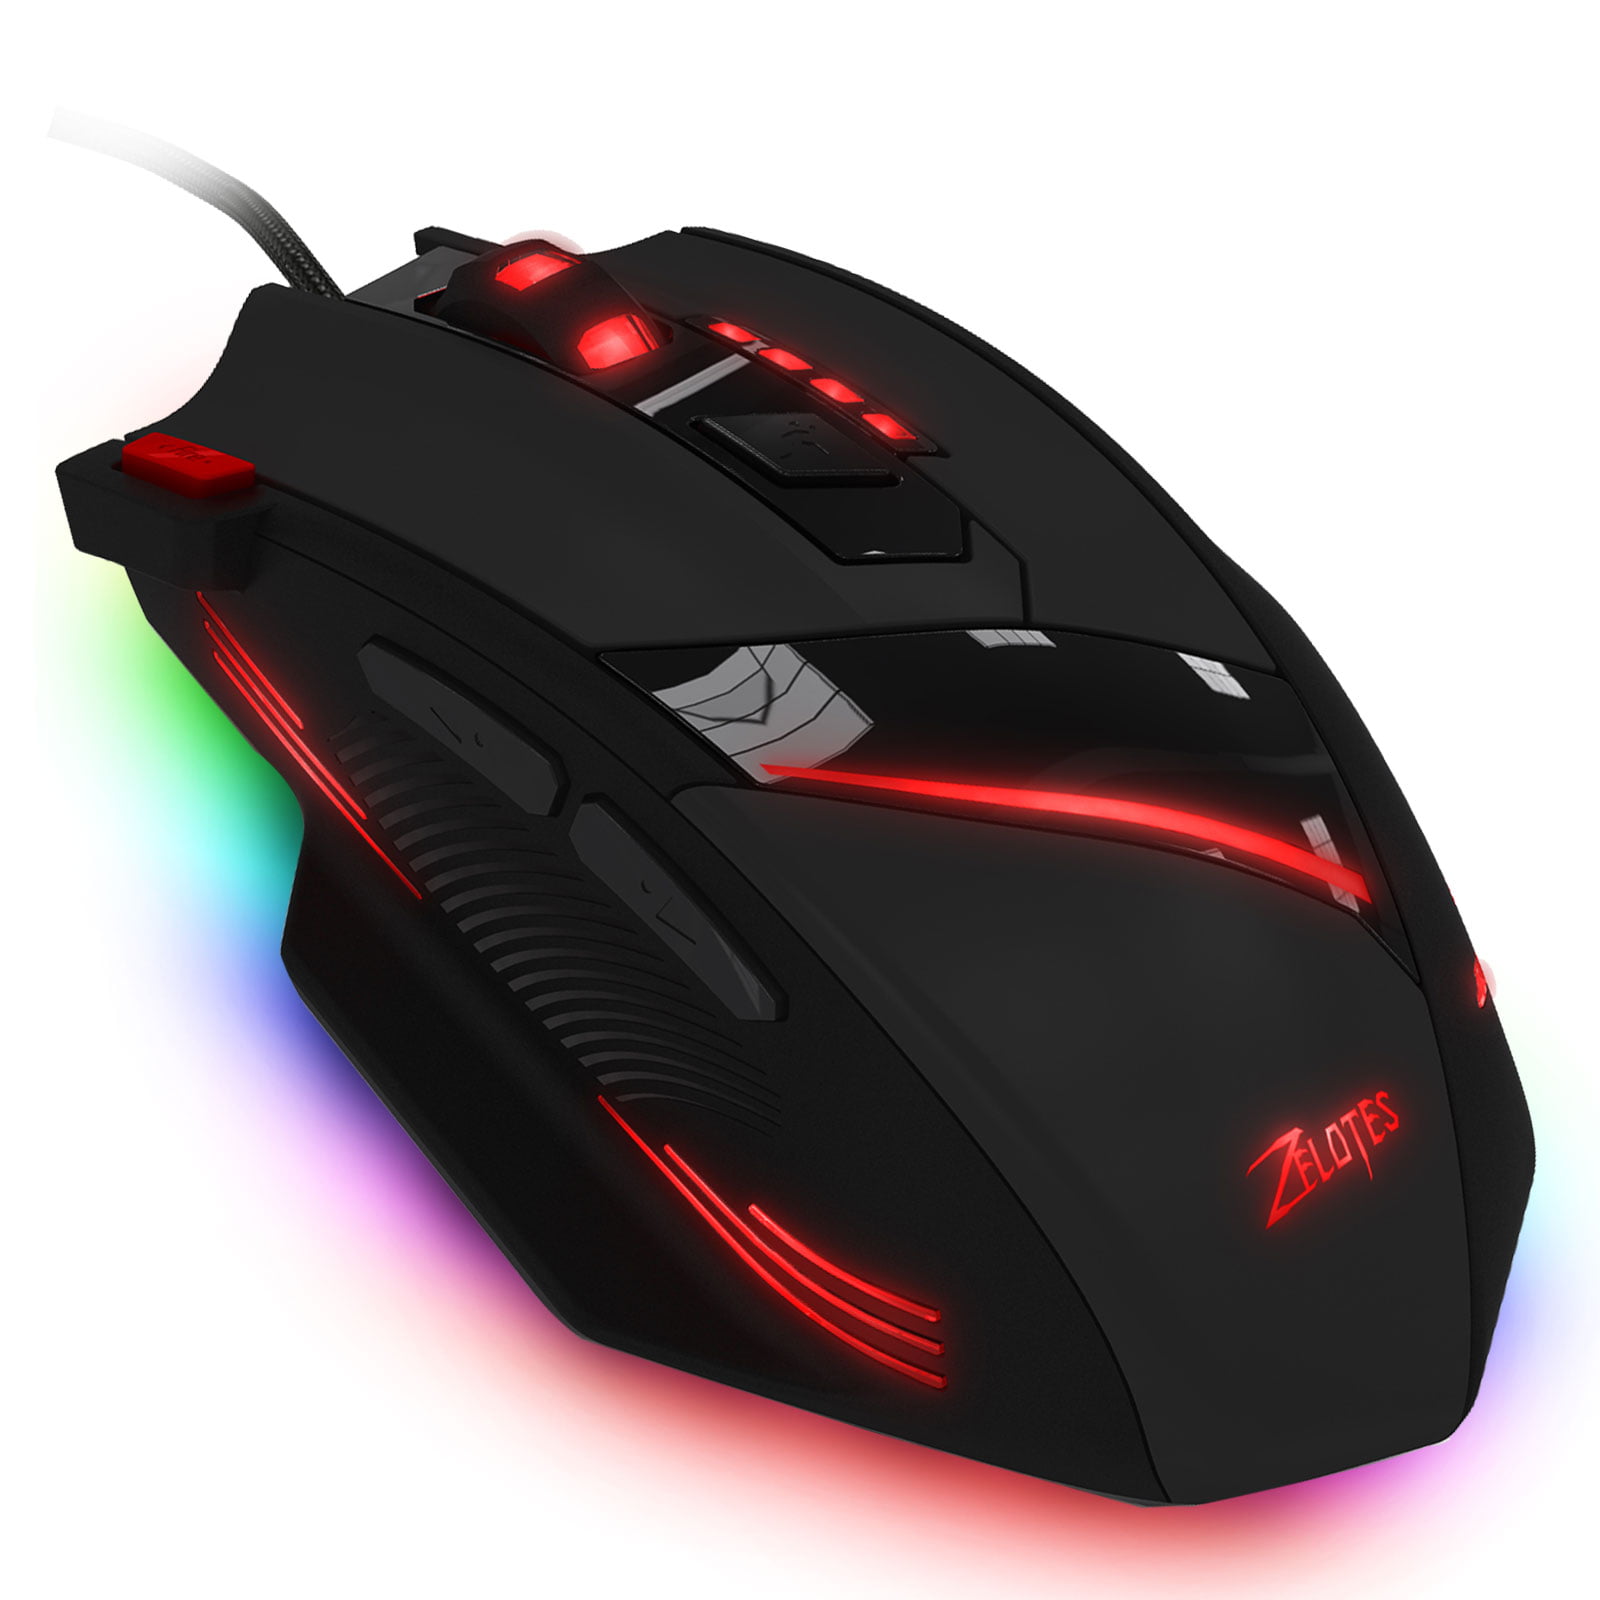 Tsv Wired Gaming Mouse Rgb Ergonomic Gaming Mouse With Fire Button 30 Dpi Adjustable And 7 Buttons Fit For Rpg Fps Rts Games Usb Optical Wired Computer Gaming Mic Fits For Windows